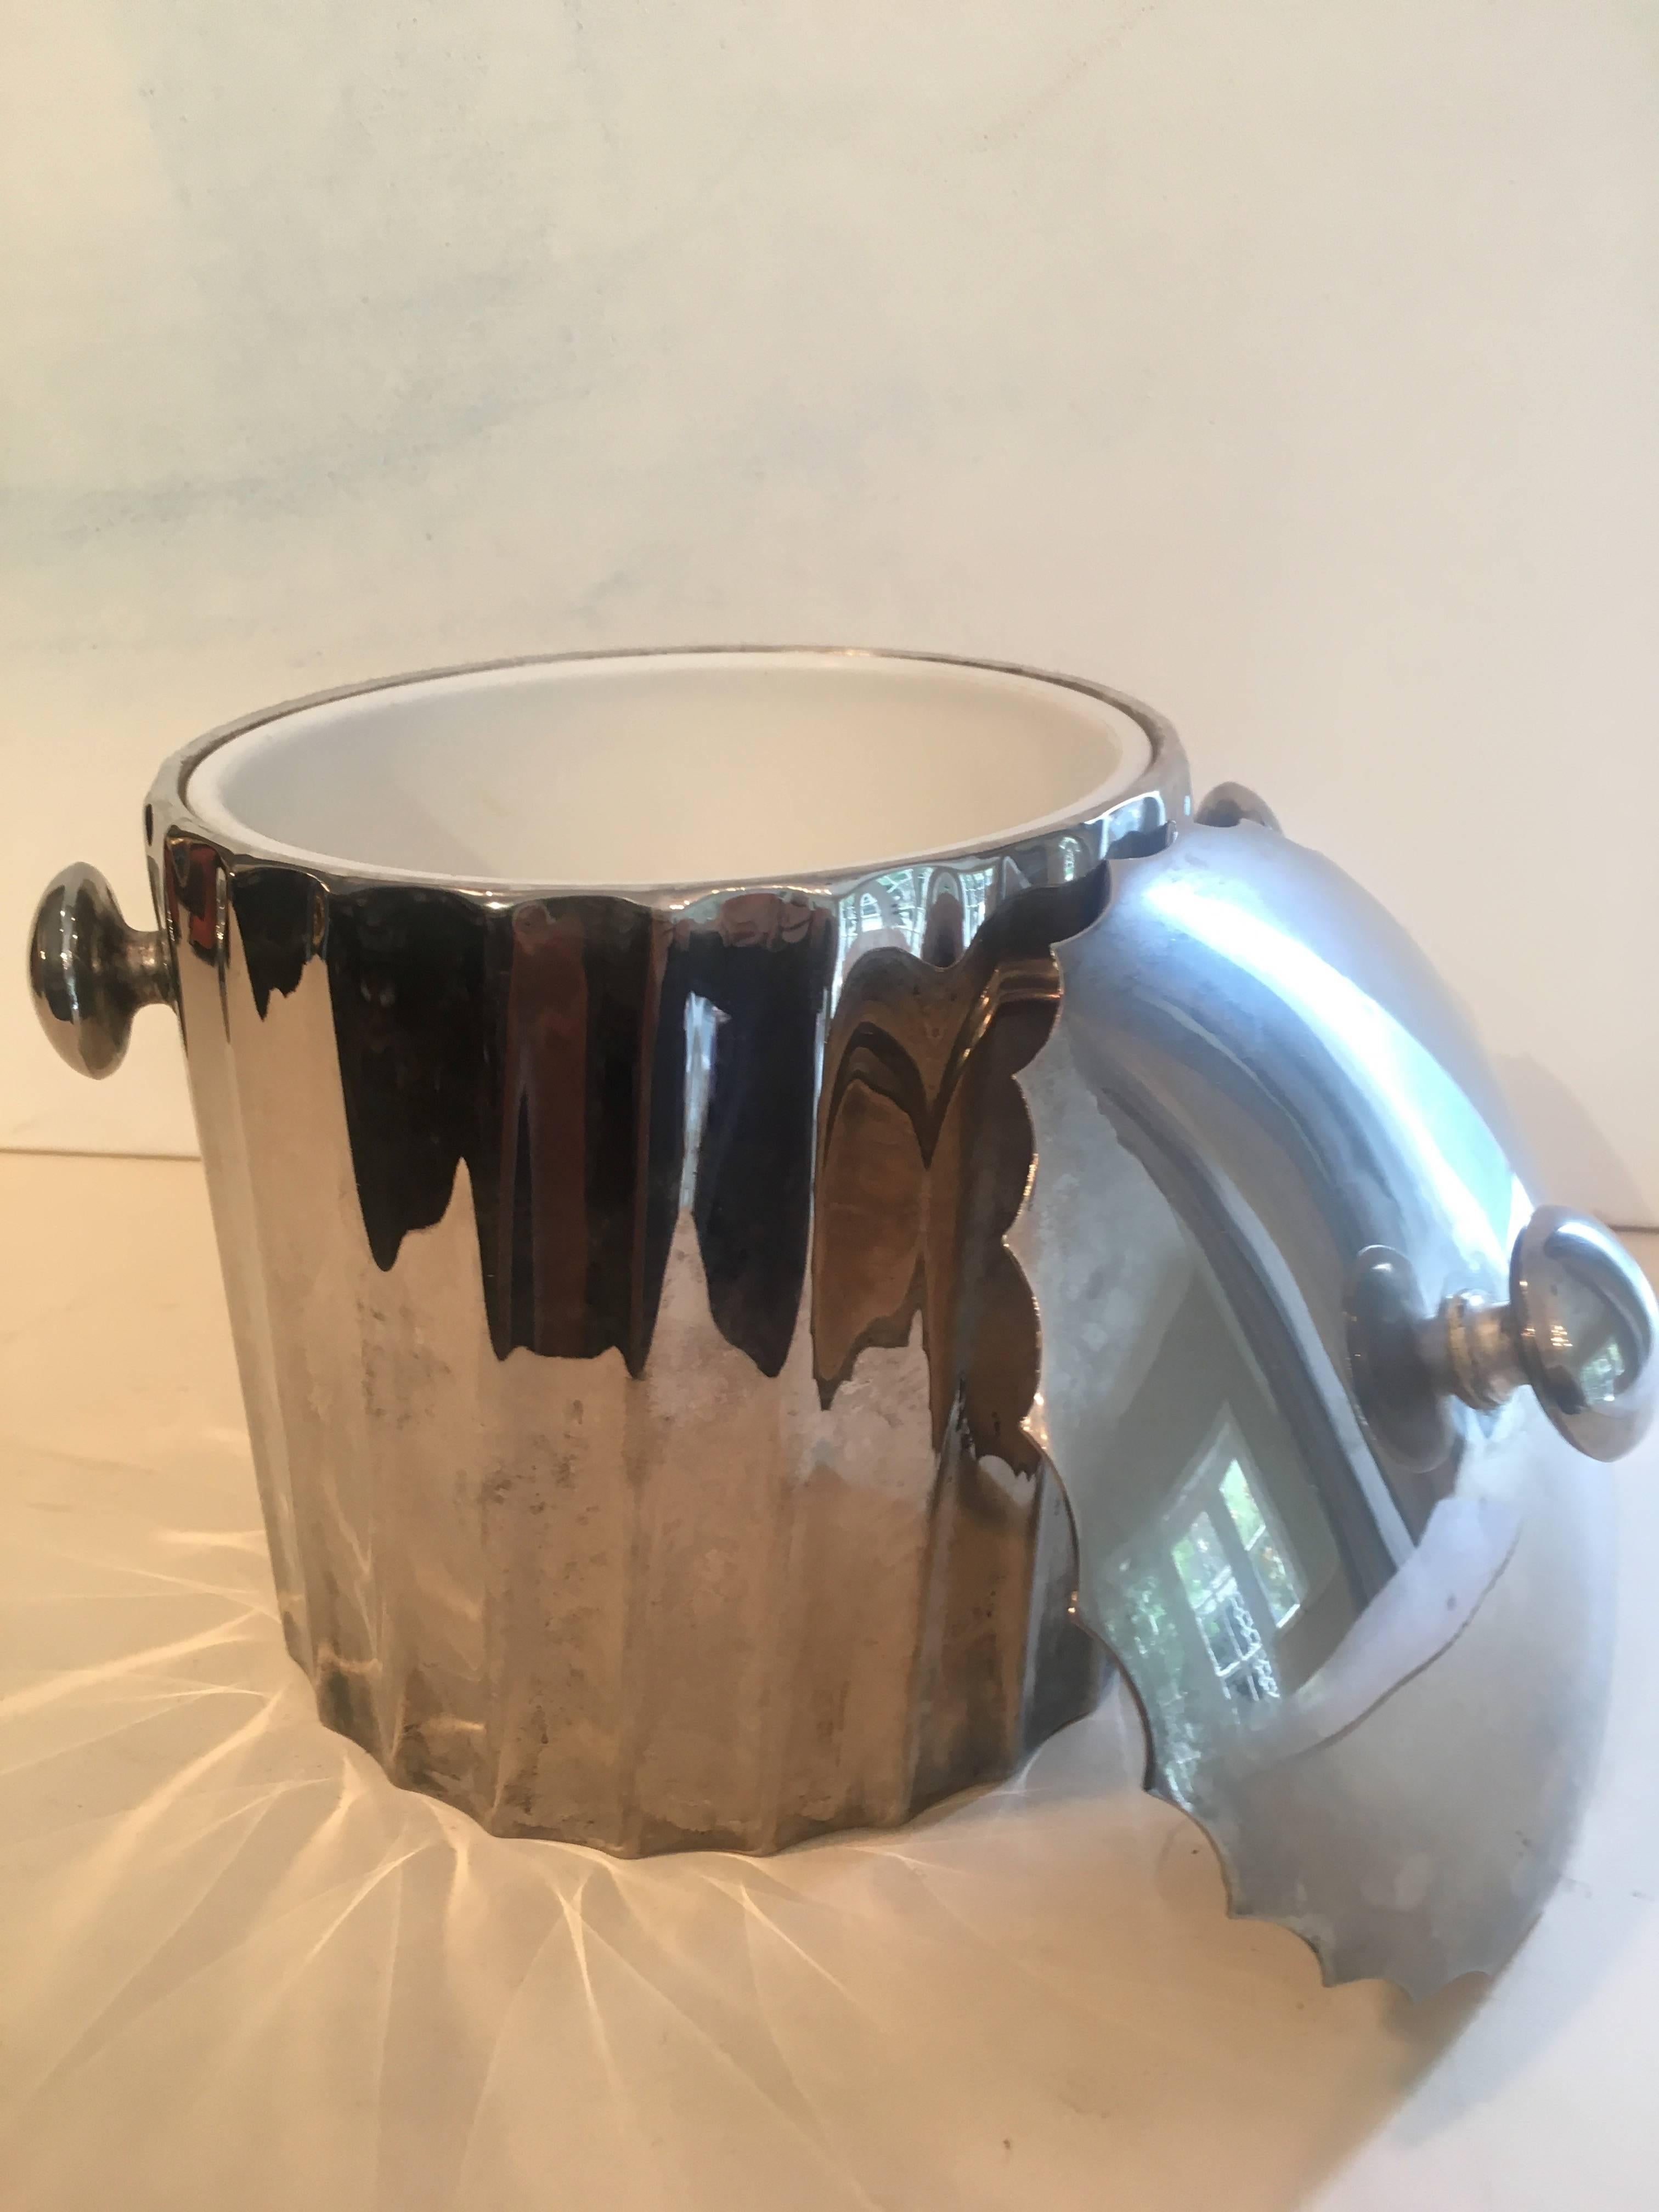 Silver Mid-Century small bar ice bucket.

Great for the bedroom or office bar, or just for those cozy small bar or bar cart.